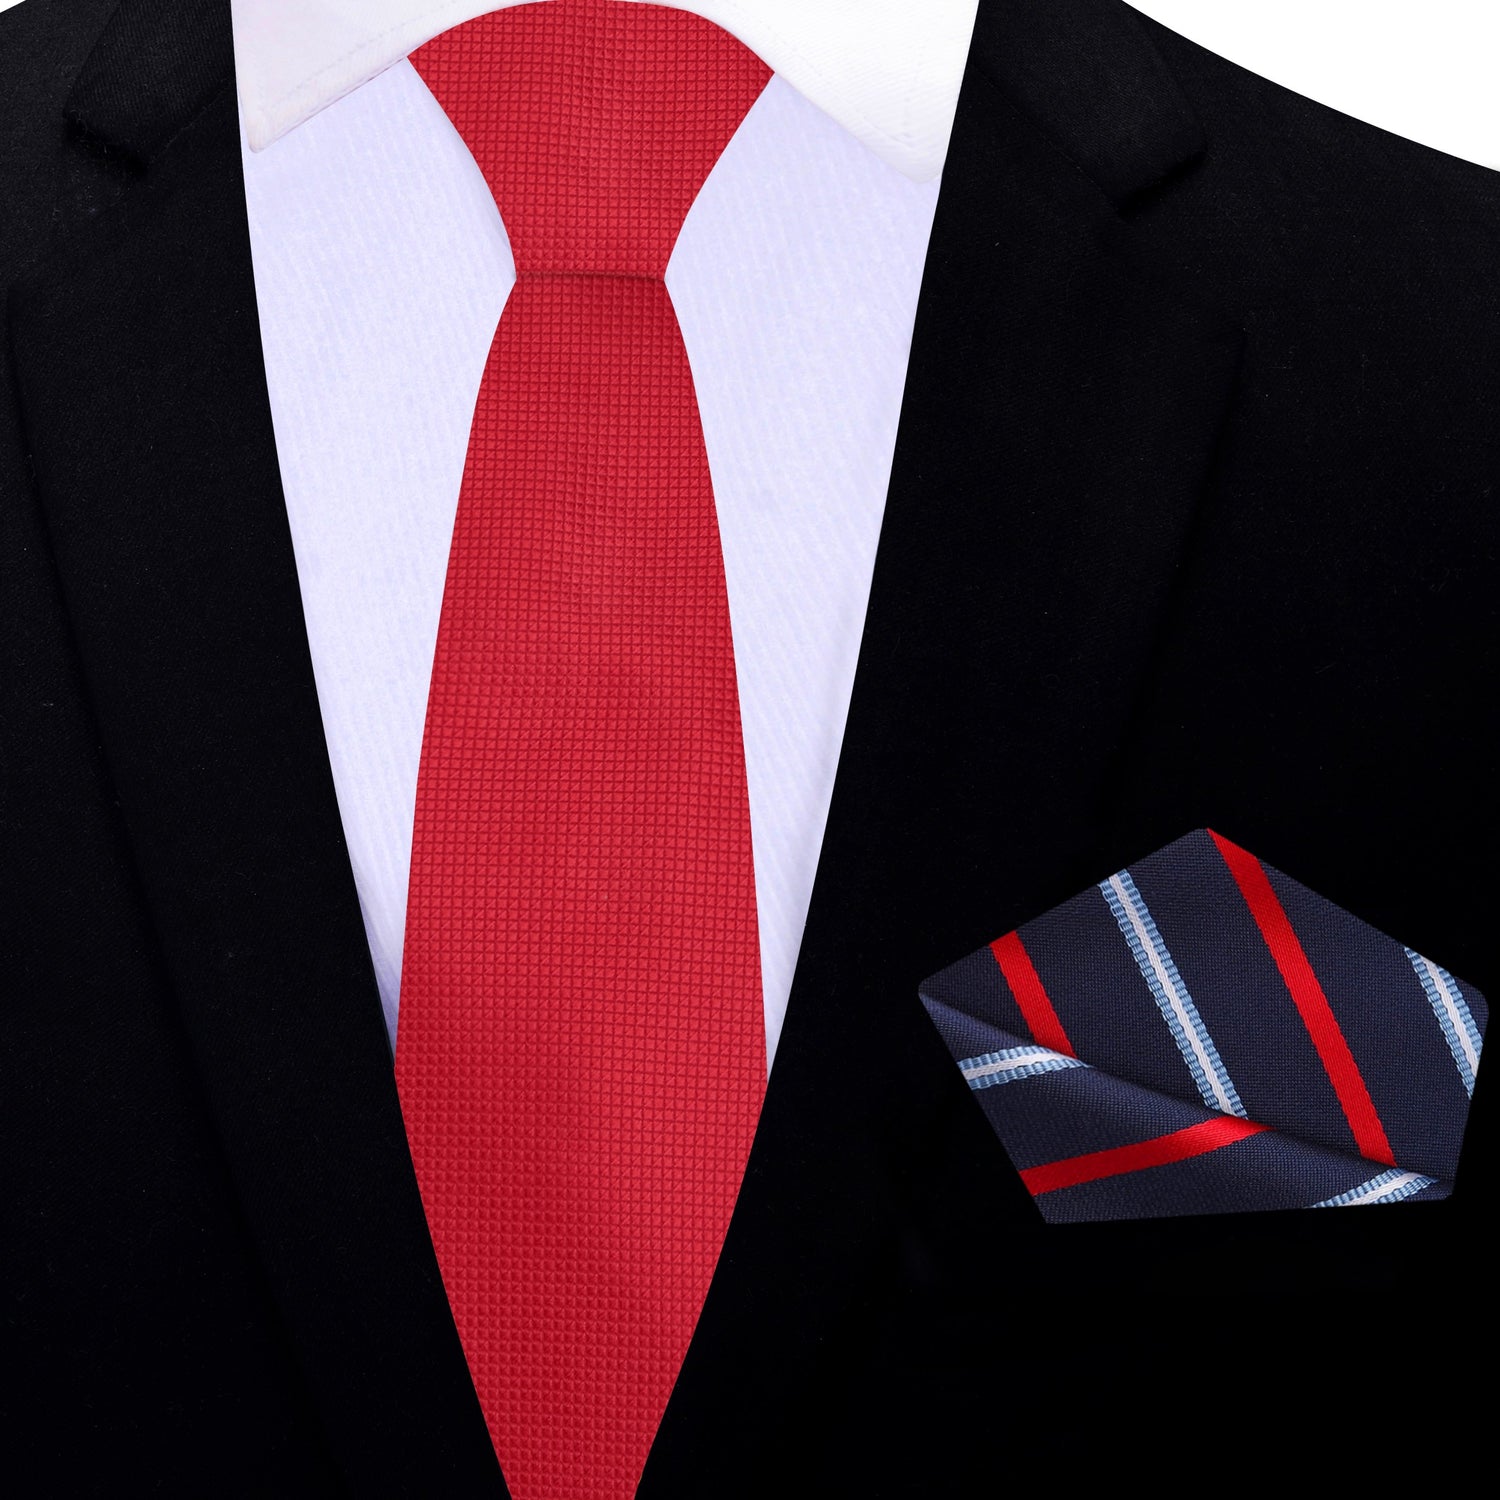 Thin Tie: Solid Red Necktie with Blue and Red Stripe Pocket Square